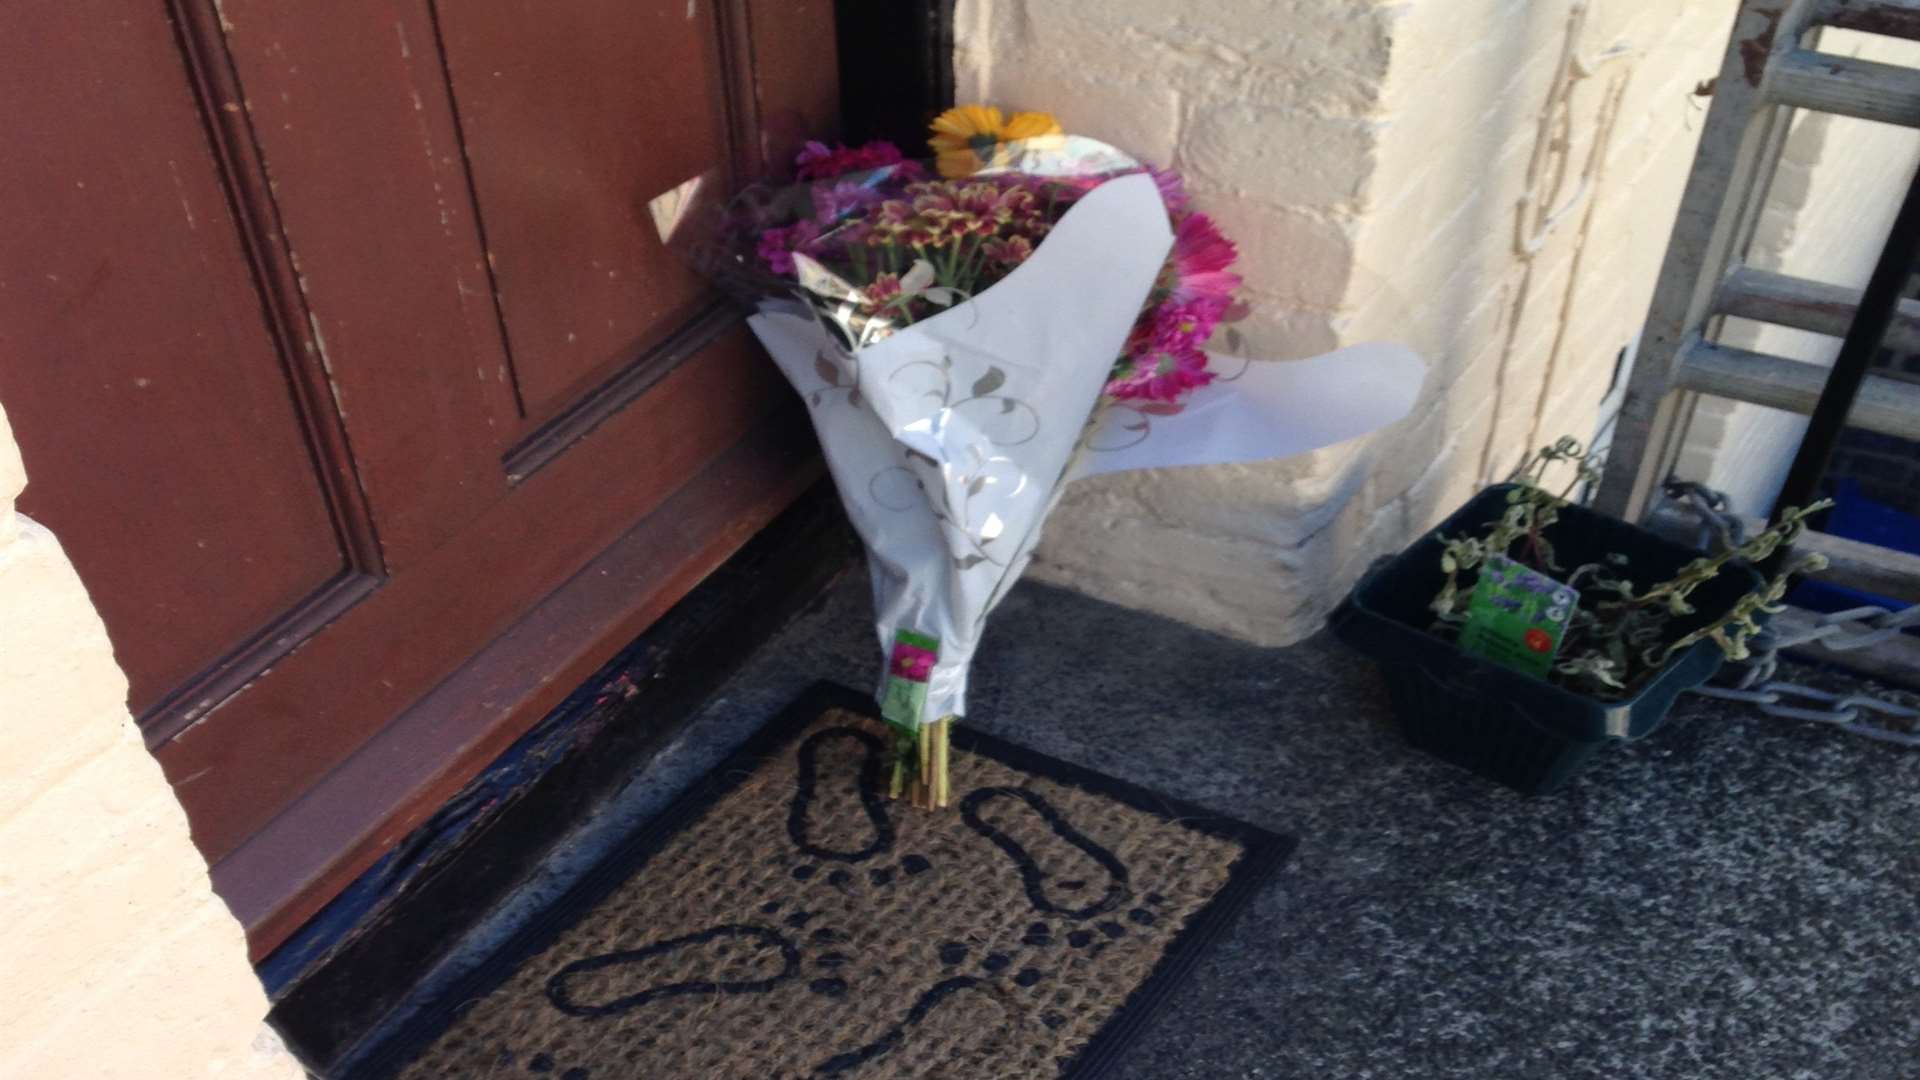 Floral tributes left at the house where toddler Frankie Hedgecock died